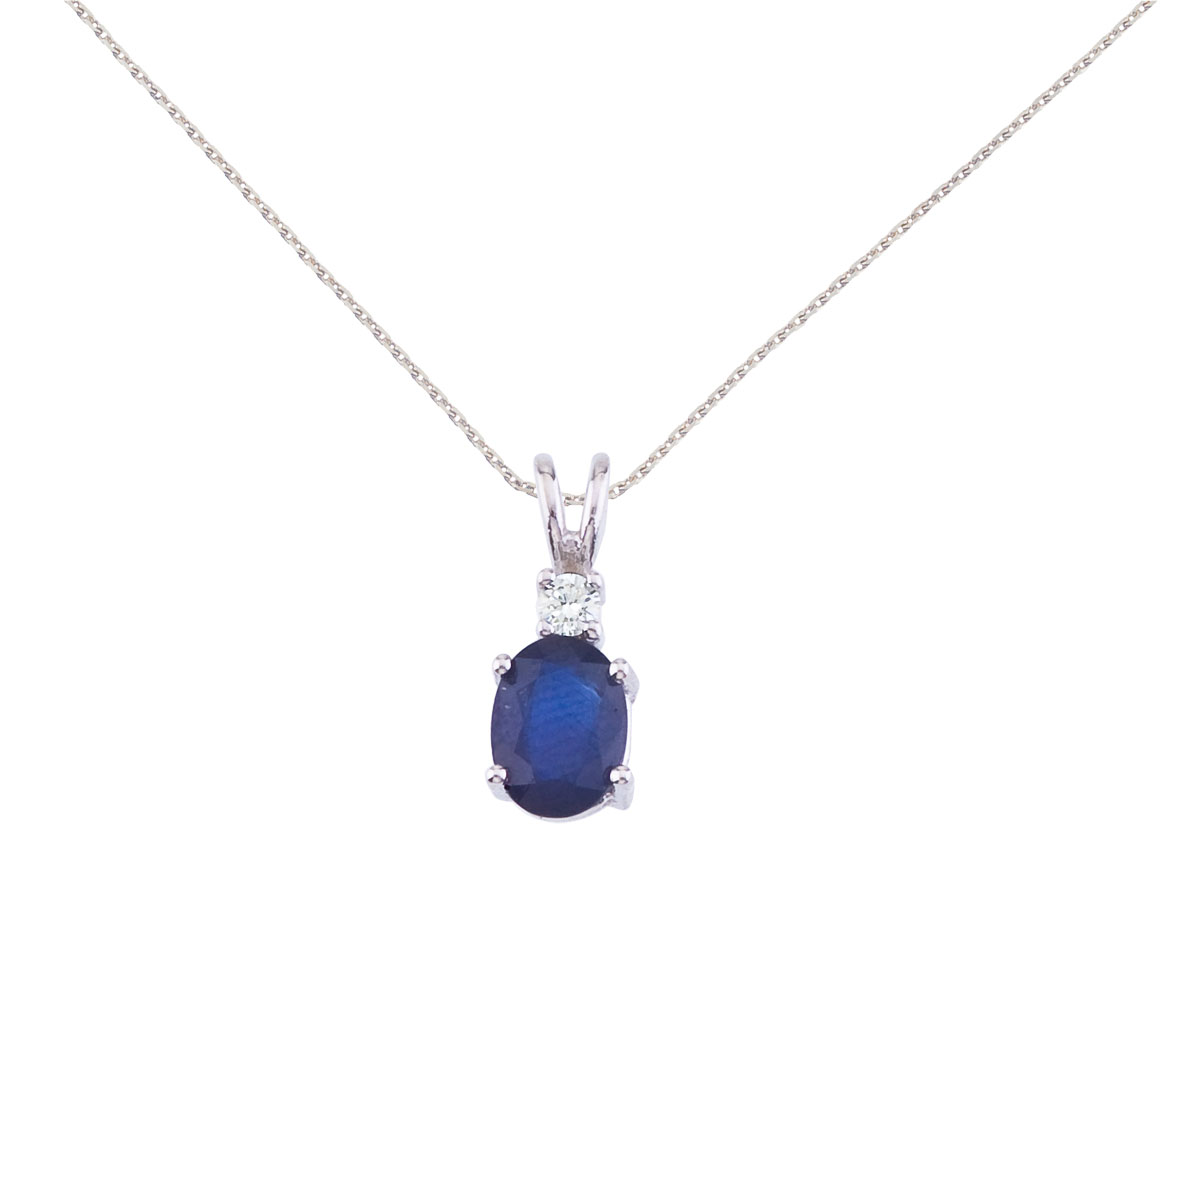 JCX2692: 7x5 mm natural sapphire and diamond pendant set in 14k white gold.